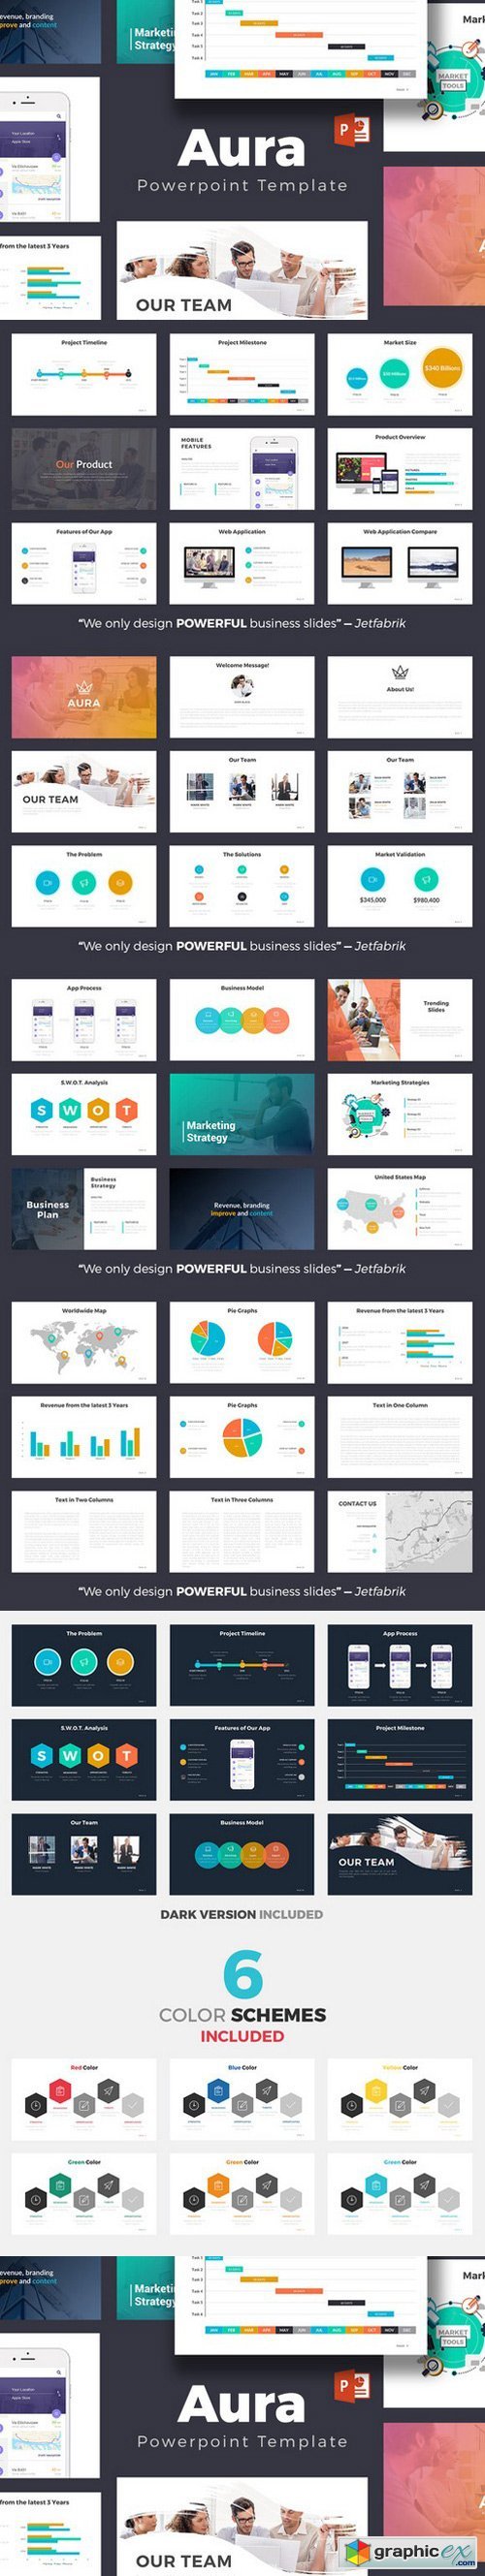 Aura Powerpoint Template Free Download